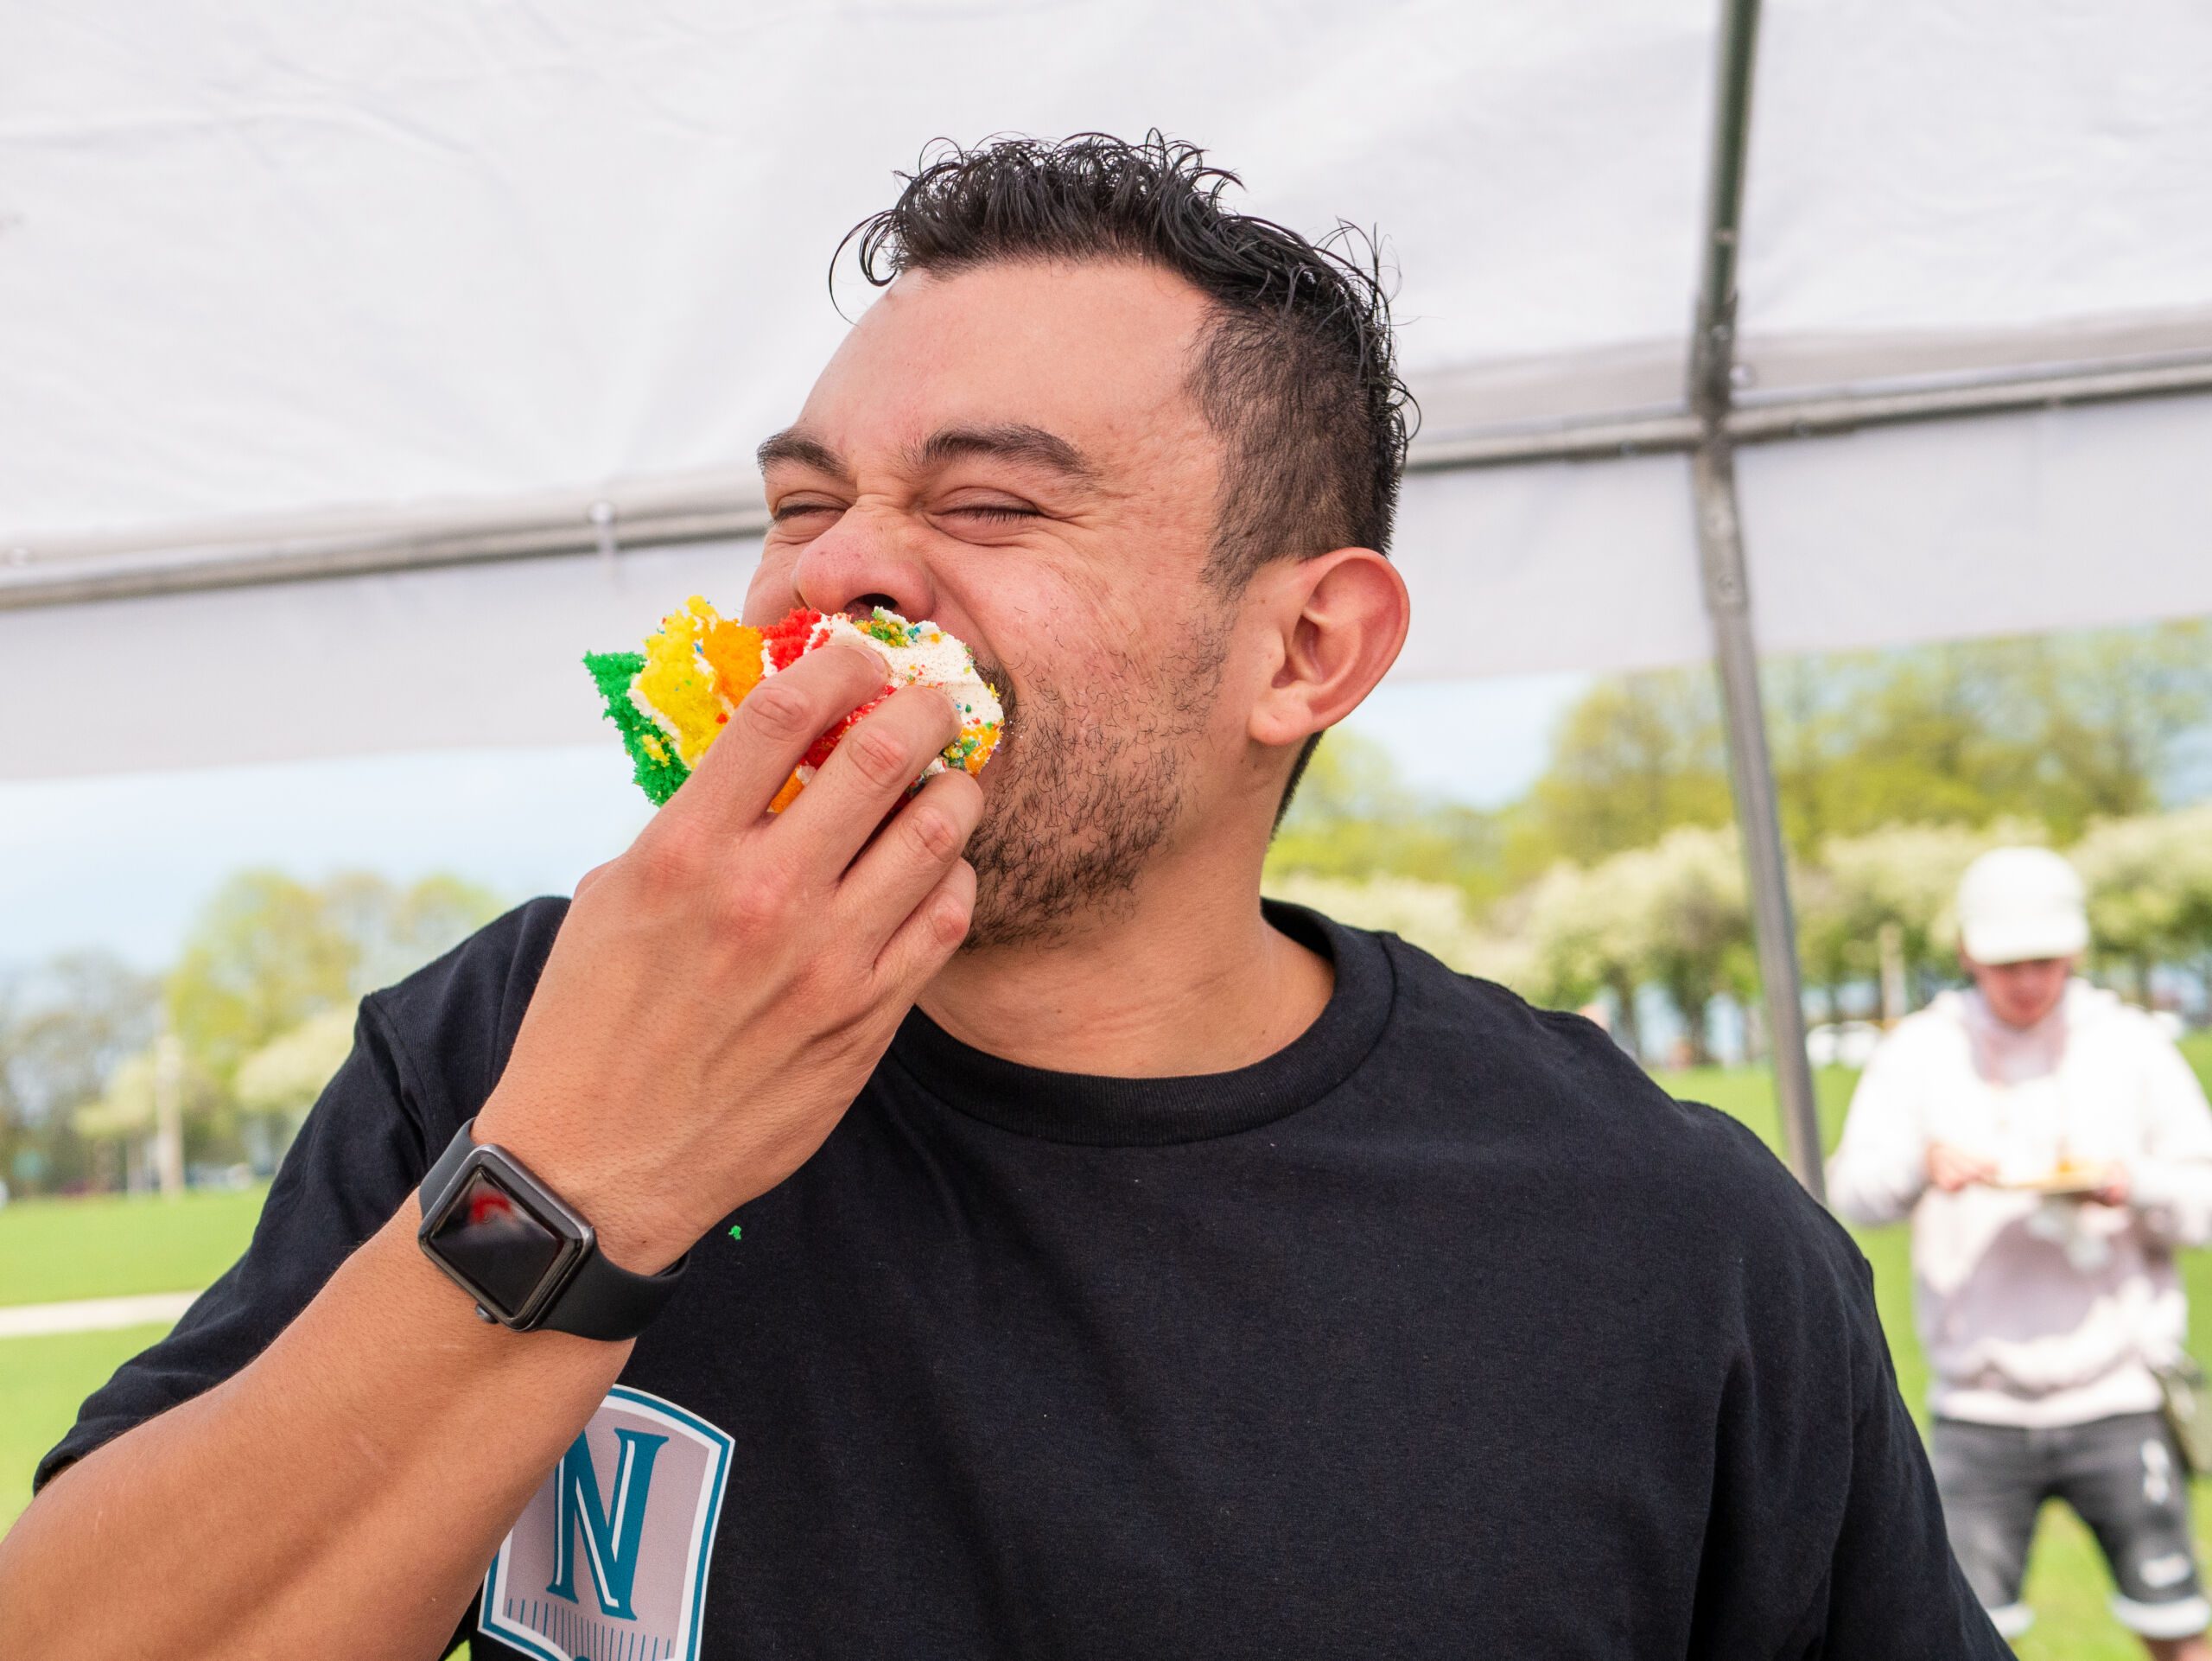 Photo of someone eating a cake slice at the carnival. Their eyes are closed. Their right hand is holding the slice as they eat it.